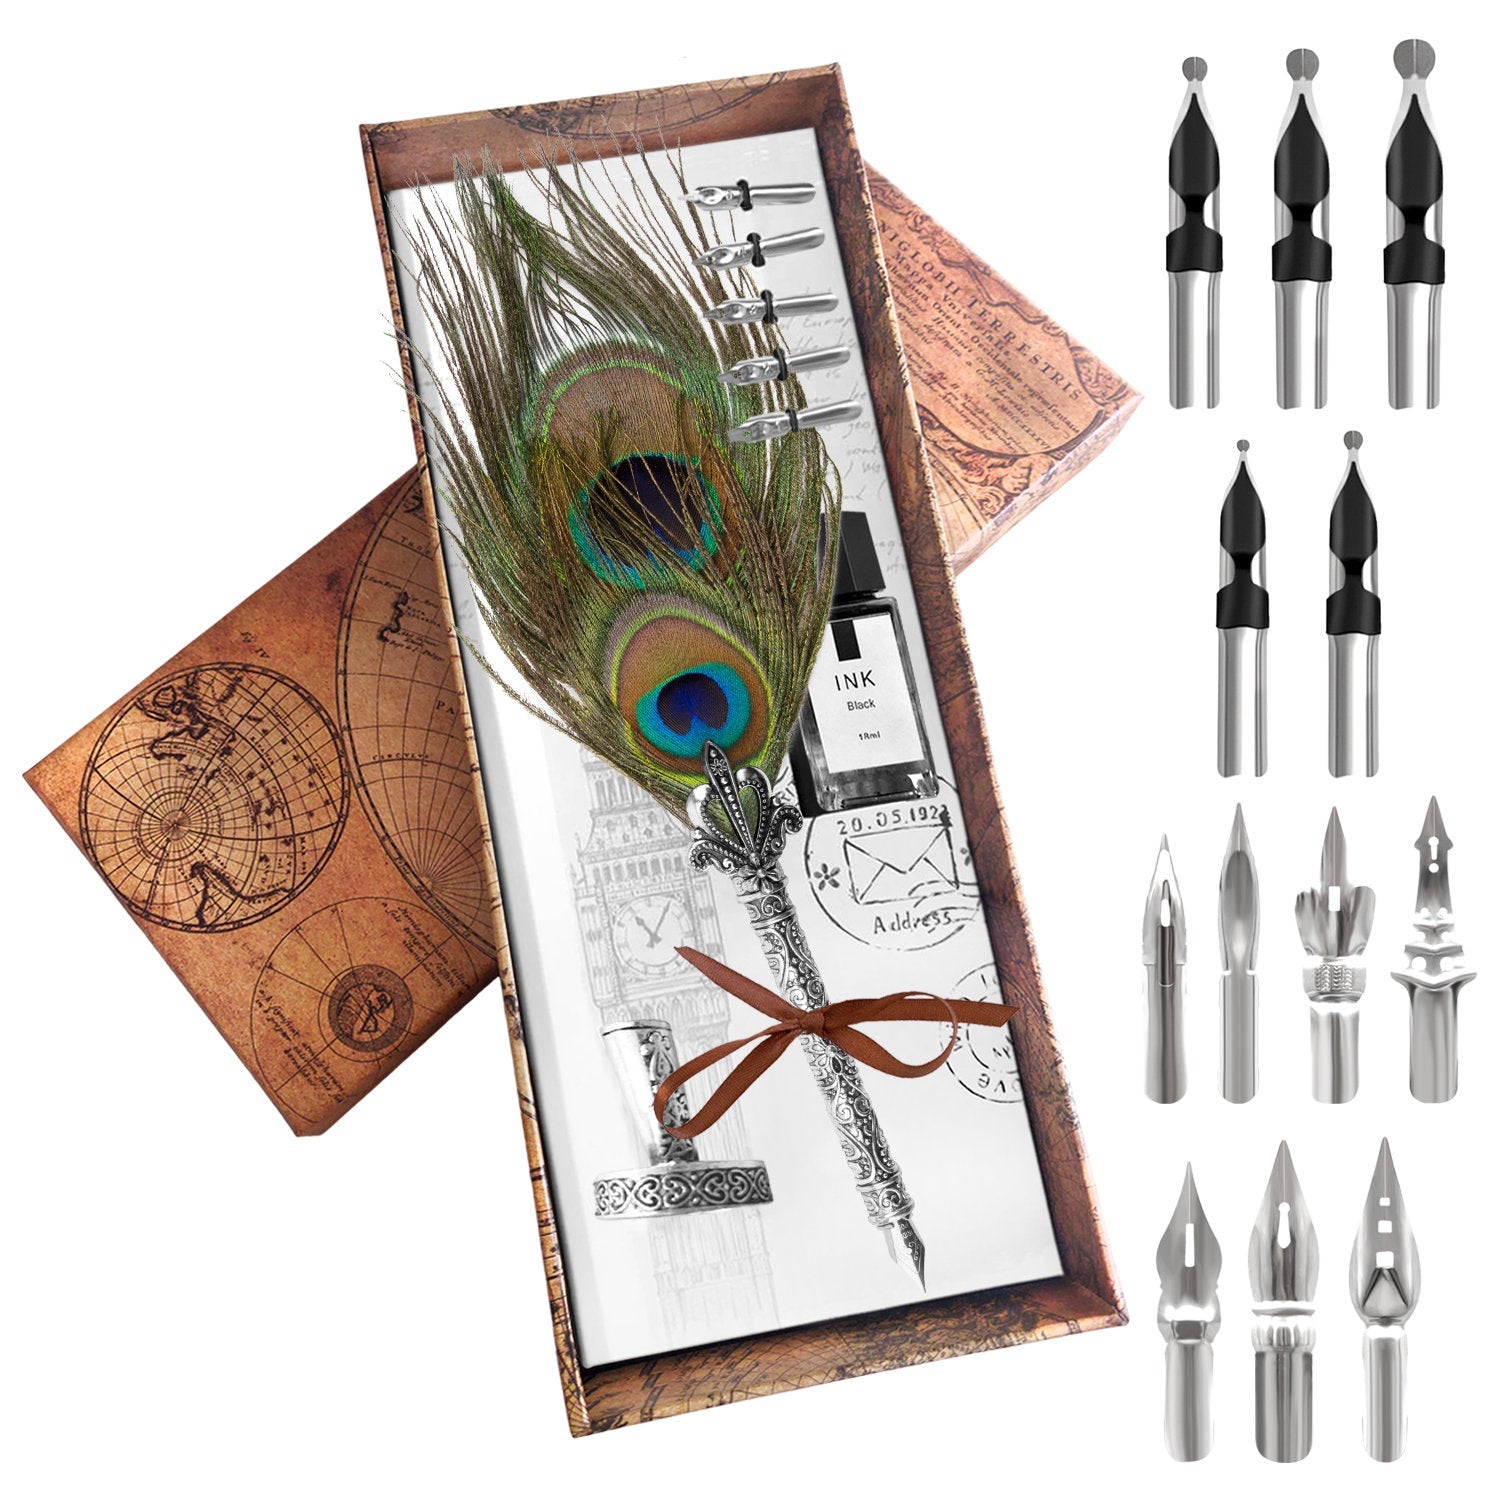 Peacock Feather Pen and Ink Set - Trustela